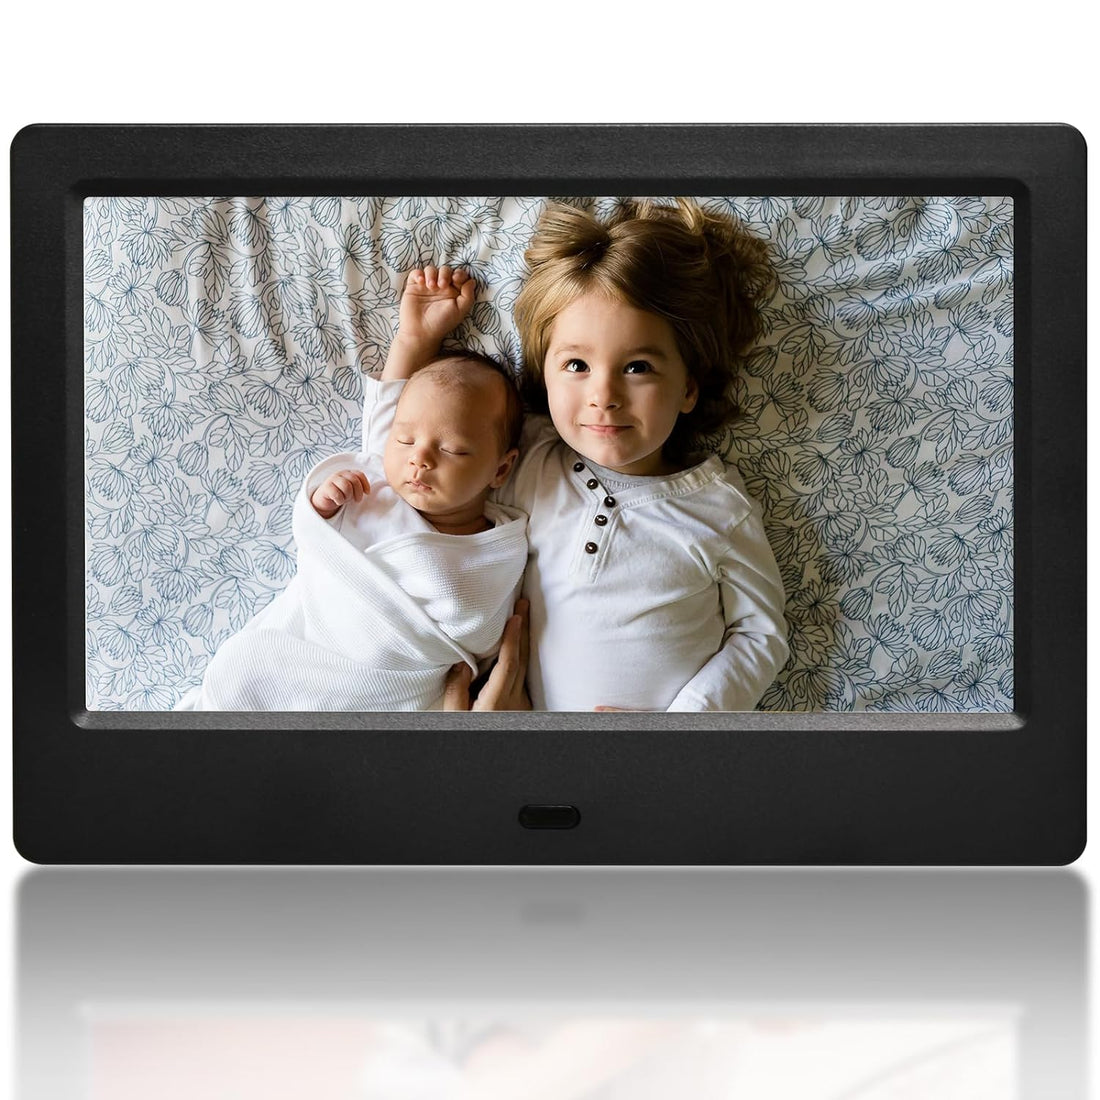 Amaboo 7 Inch Digital Picture Frame, 1024x600 HD IPS Display Digital Photo Frame with Remote Control, USB or SD Card Required, Supports Photo/Video/Music/Calendar/Slideshow